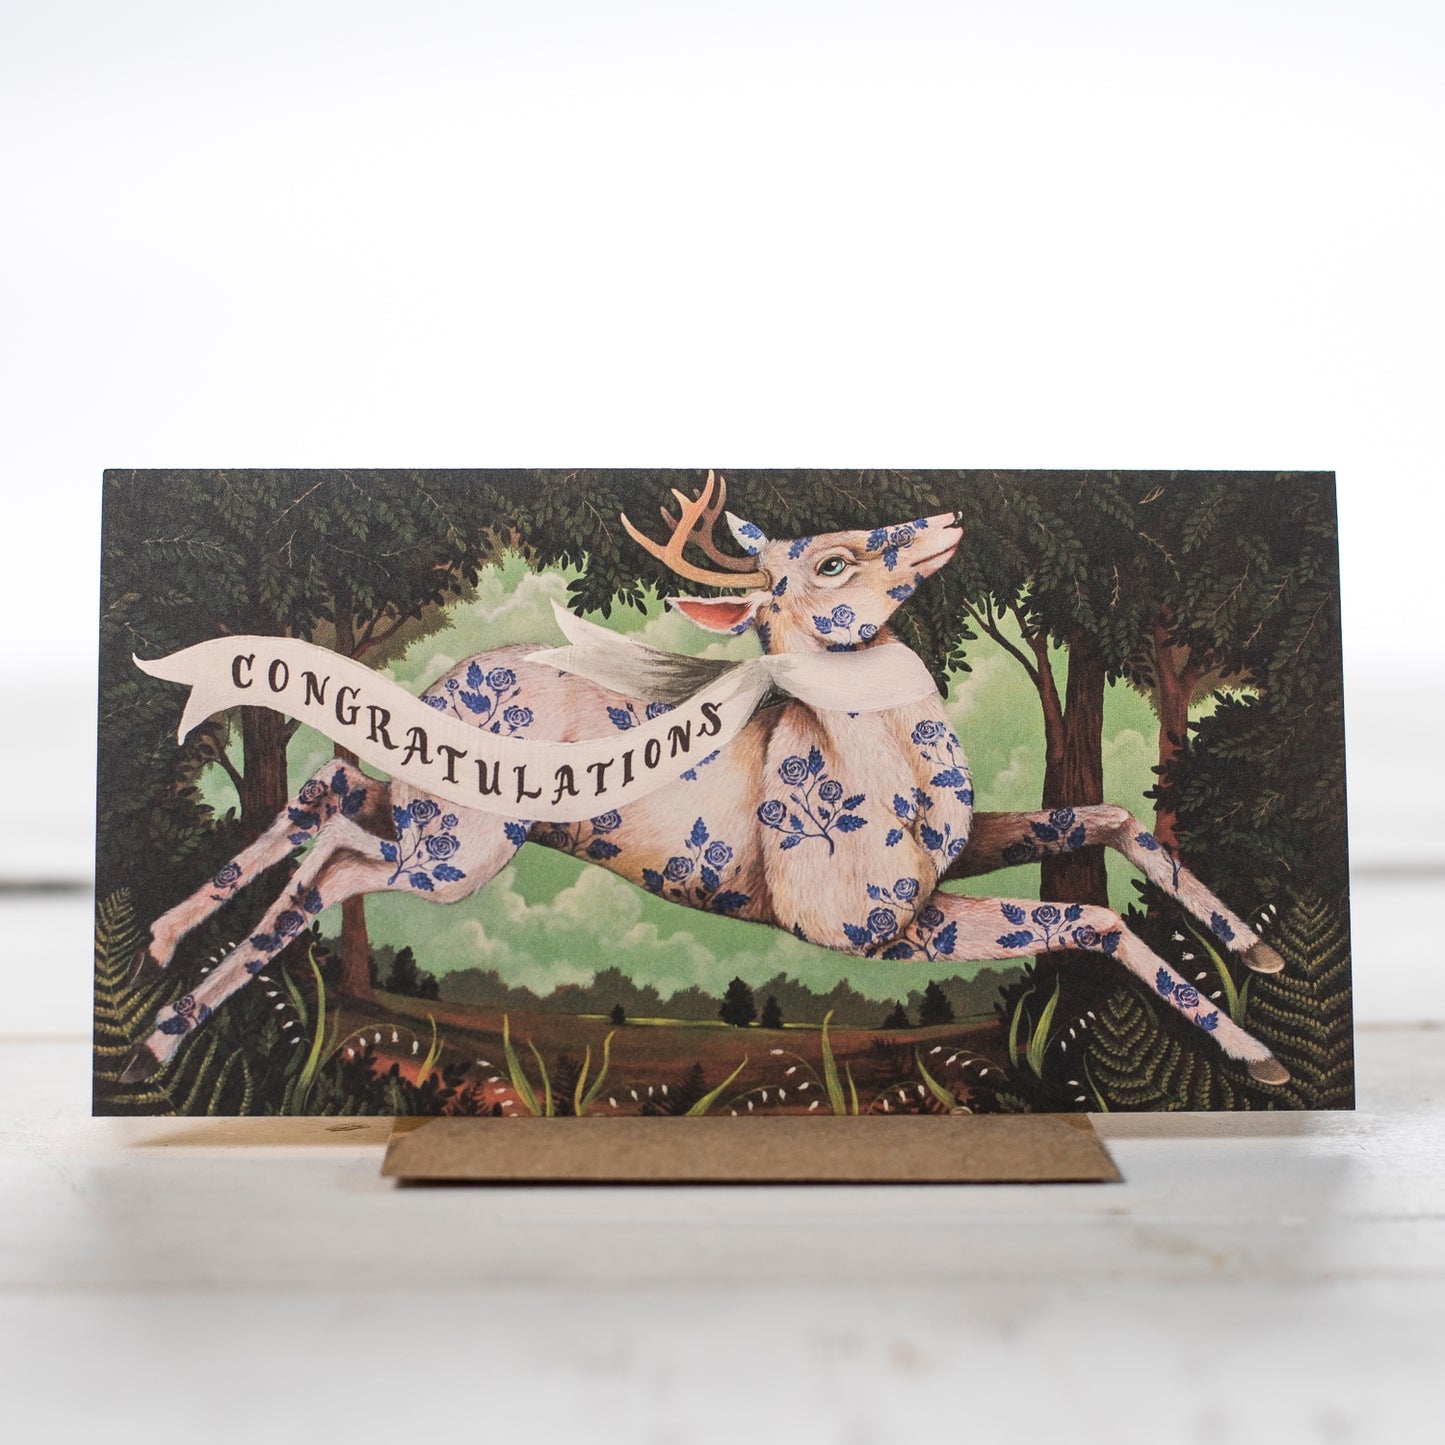 A deer leaping in a forrest  covered with blue flowers printed on his fur wearing a banner that says Congratulations